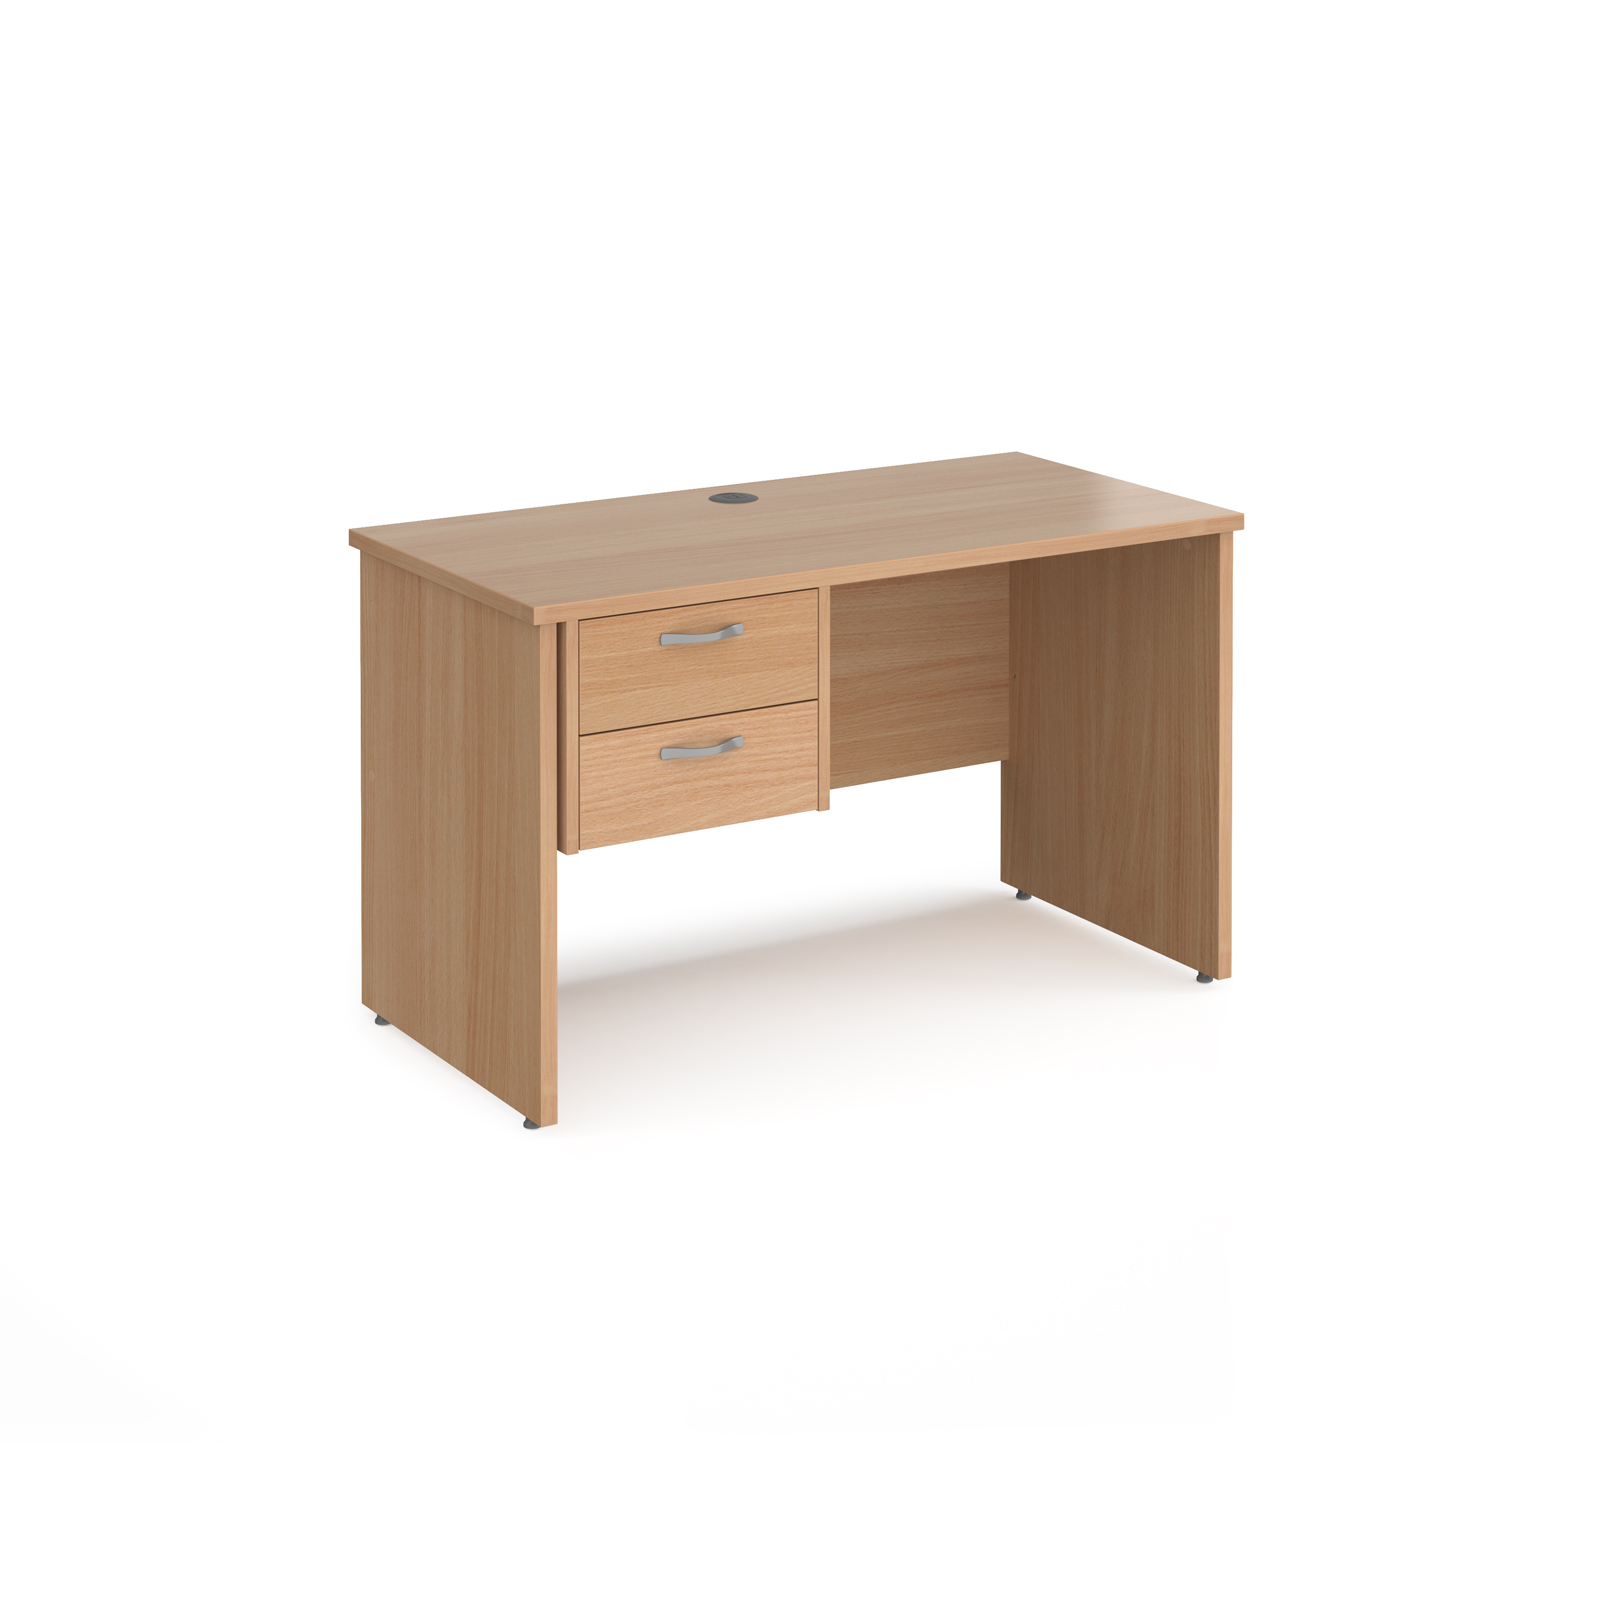 Maestro 25 straight desk 1200mm x 600mm with 2 drawer pedestal - beech top with panel end leg